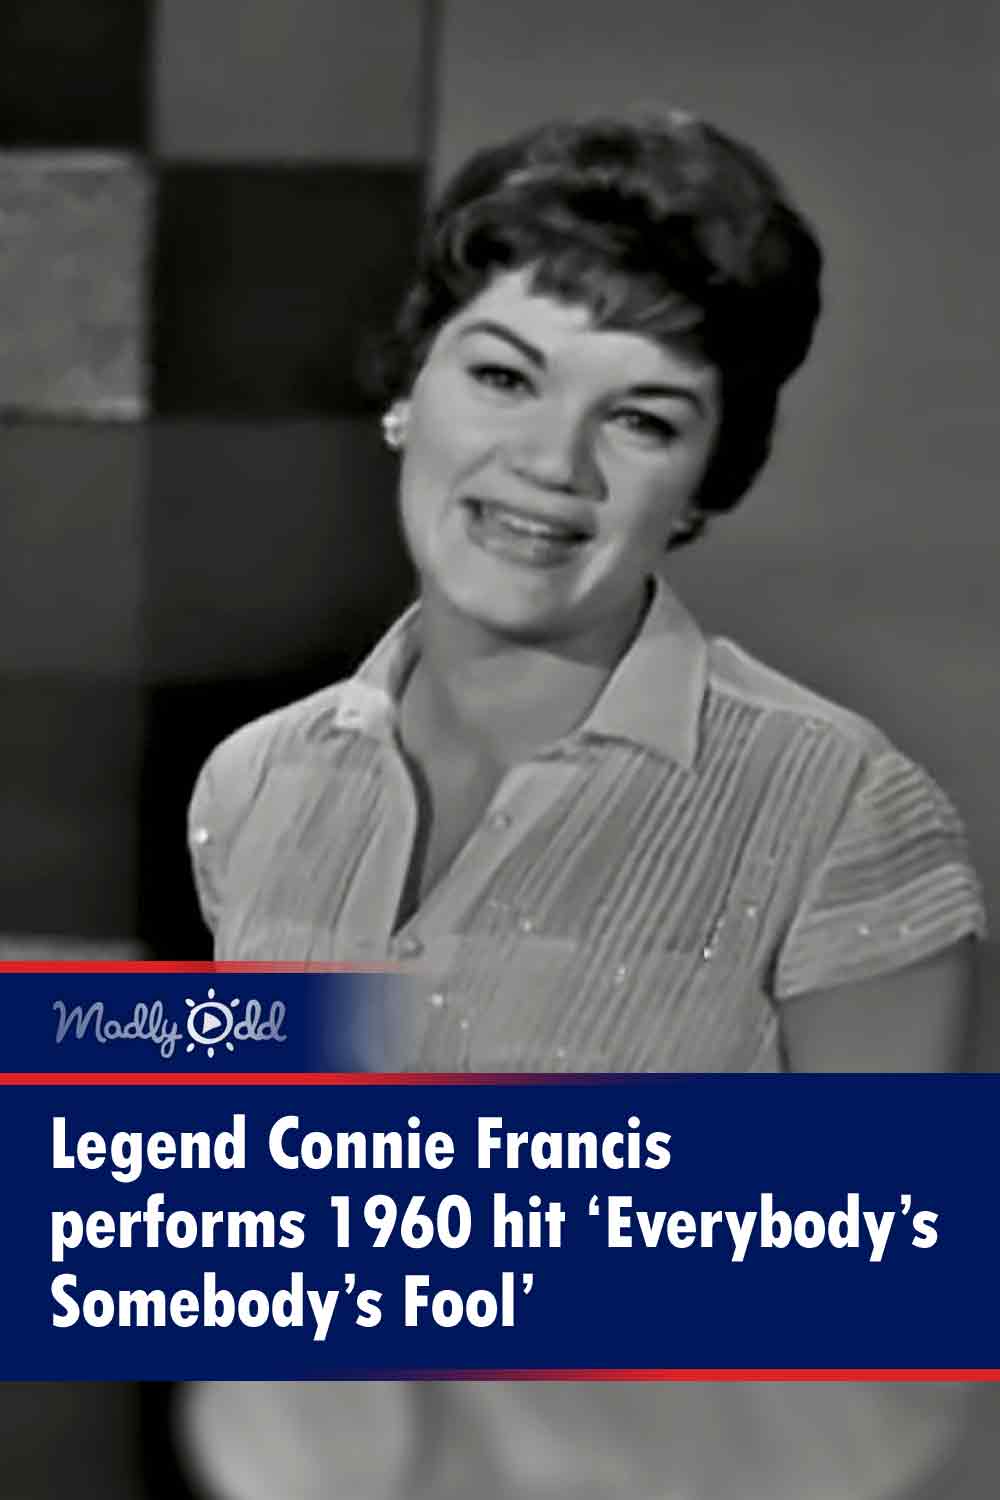 Legend Connie Francis performs 1960 hit ‘Everybody’s Somebody’s Fool’